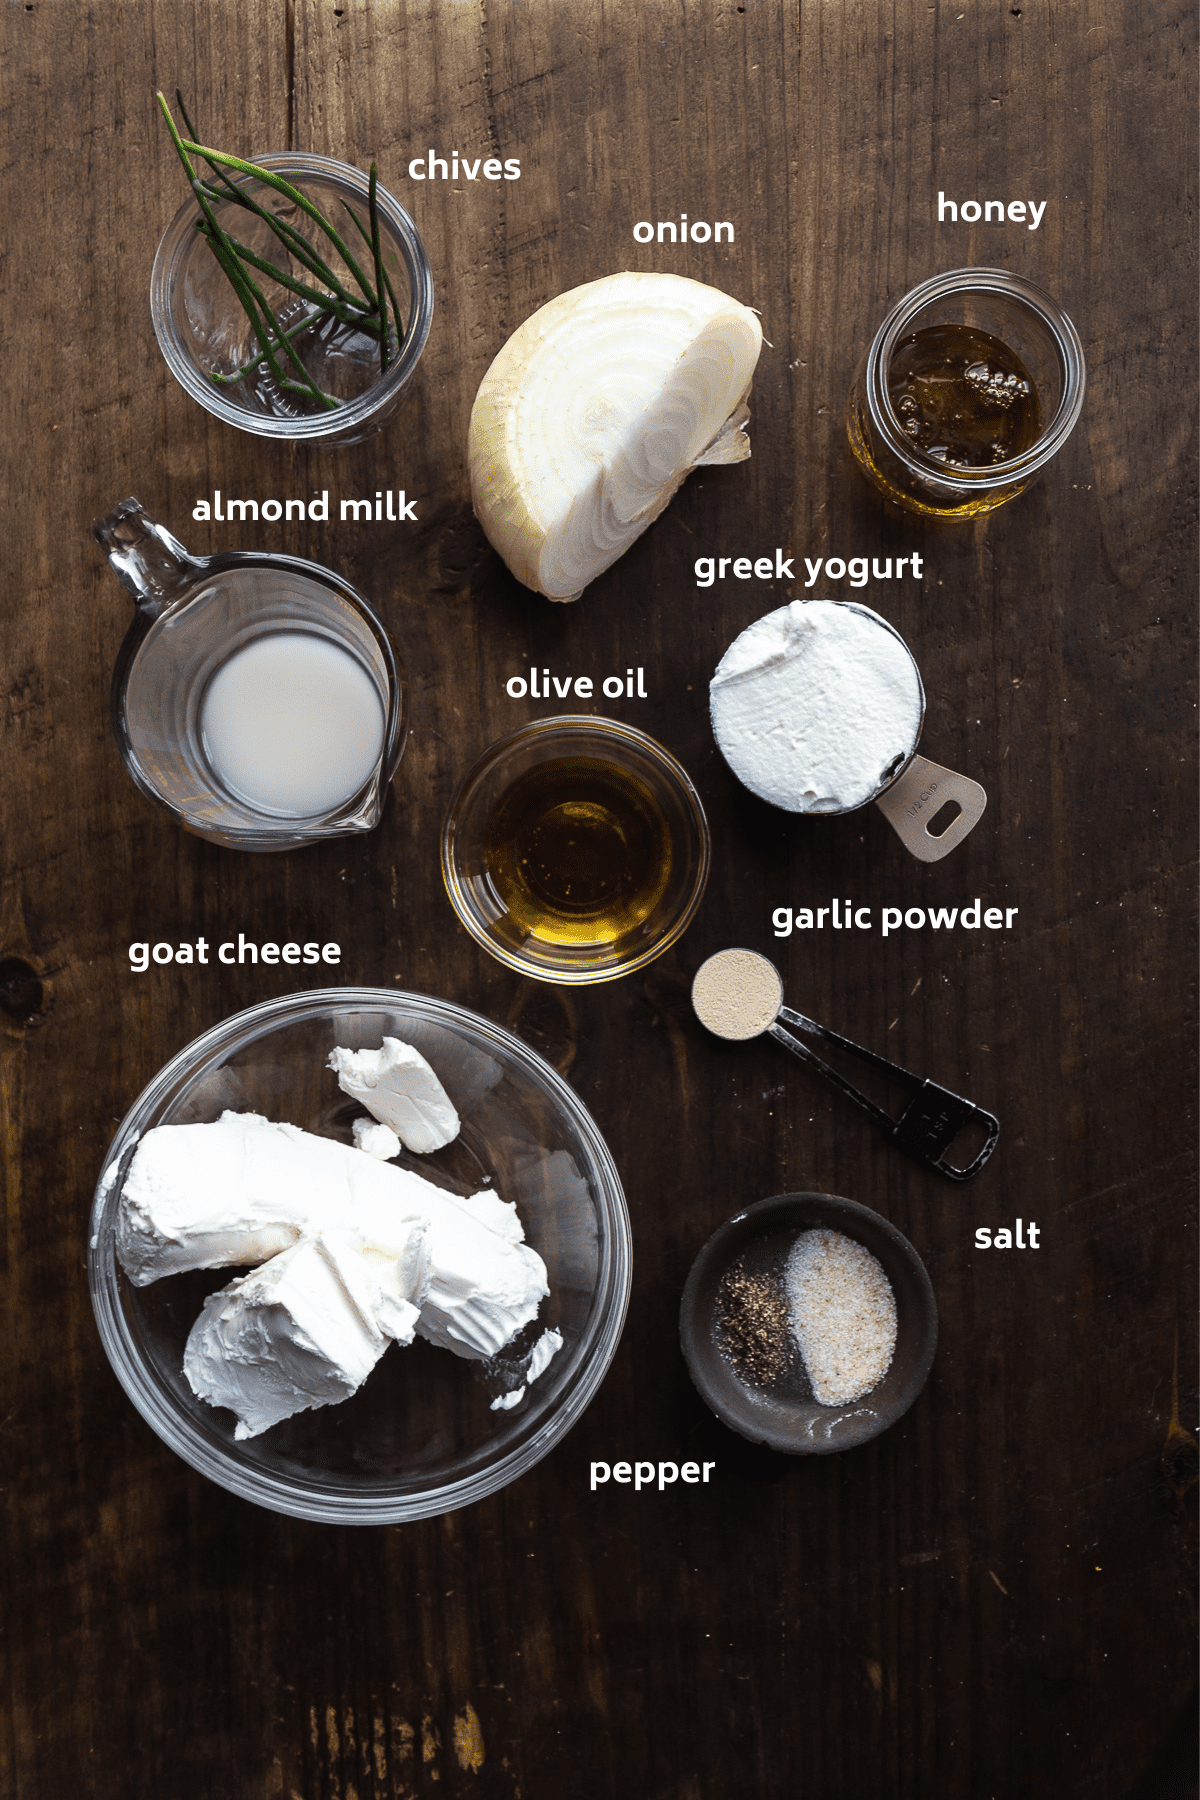 Whipped goat cheese ingredients on a wooden surface with labels in white.